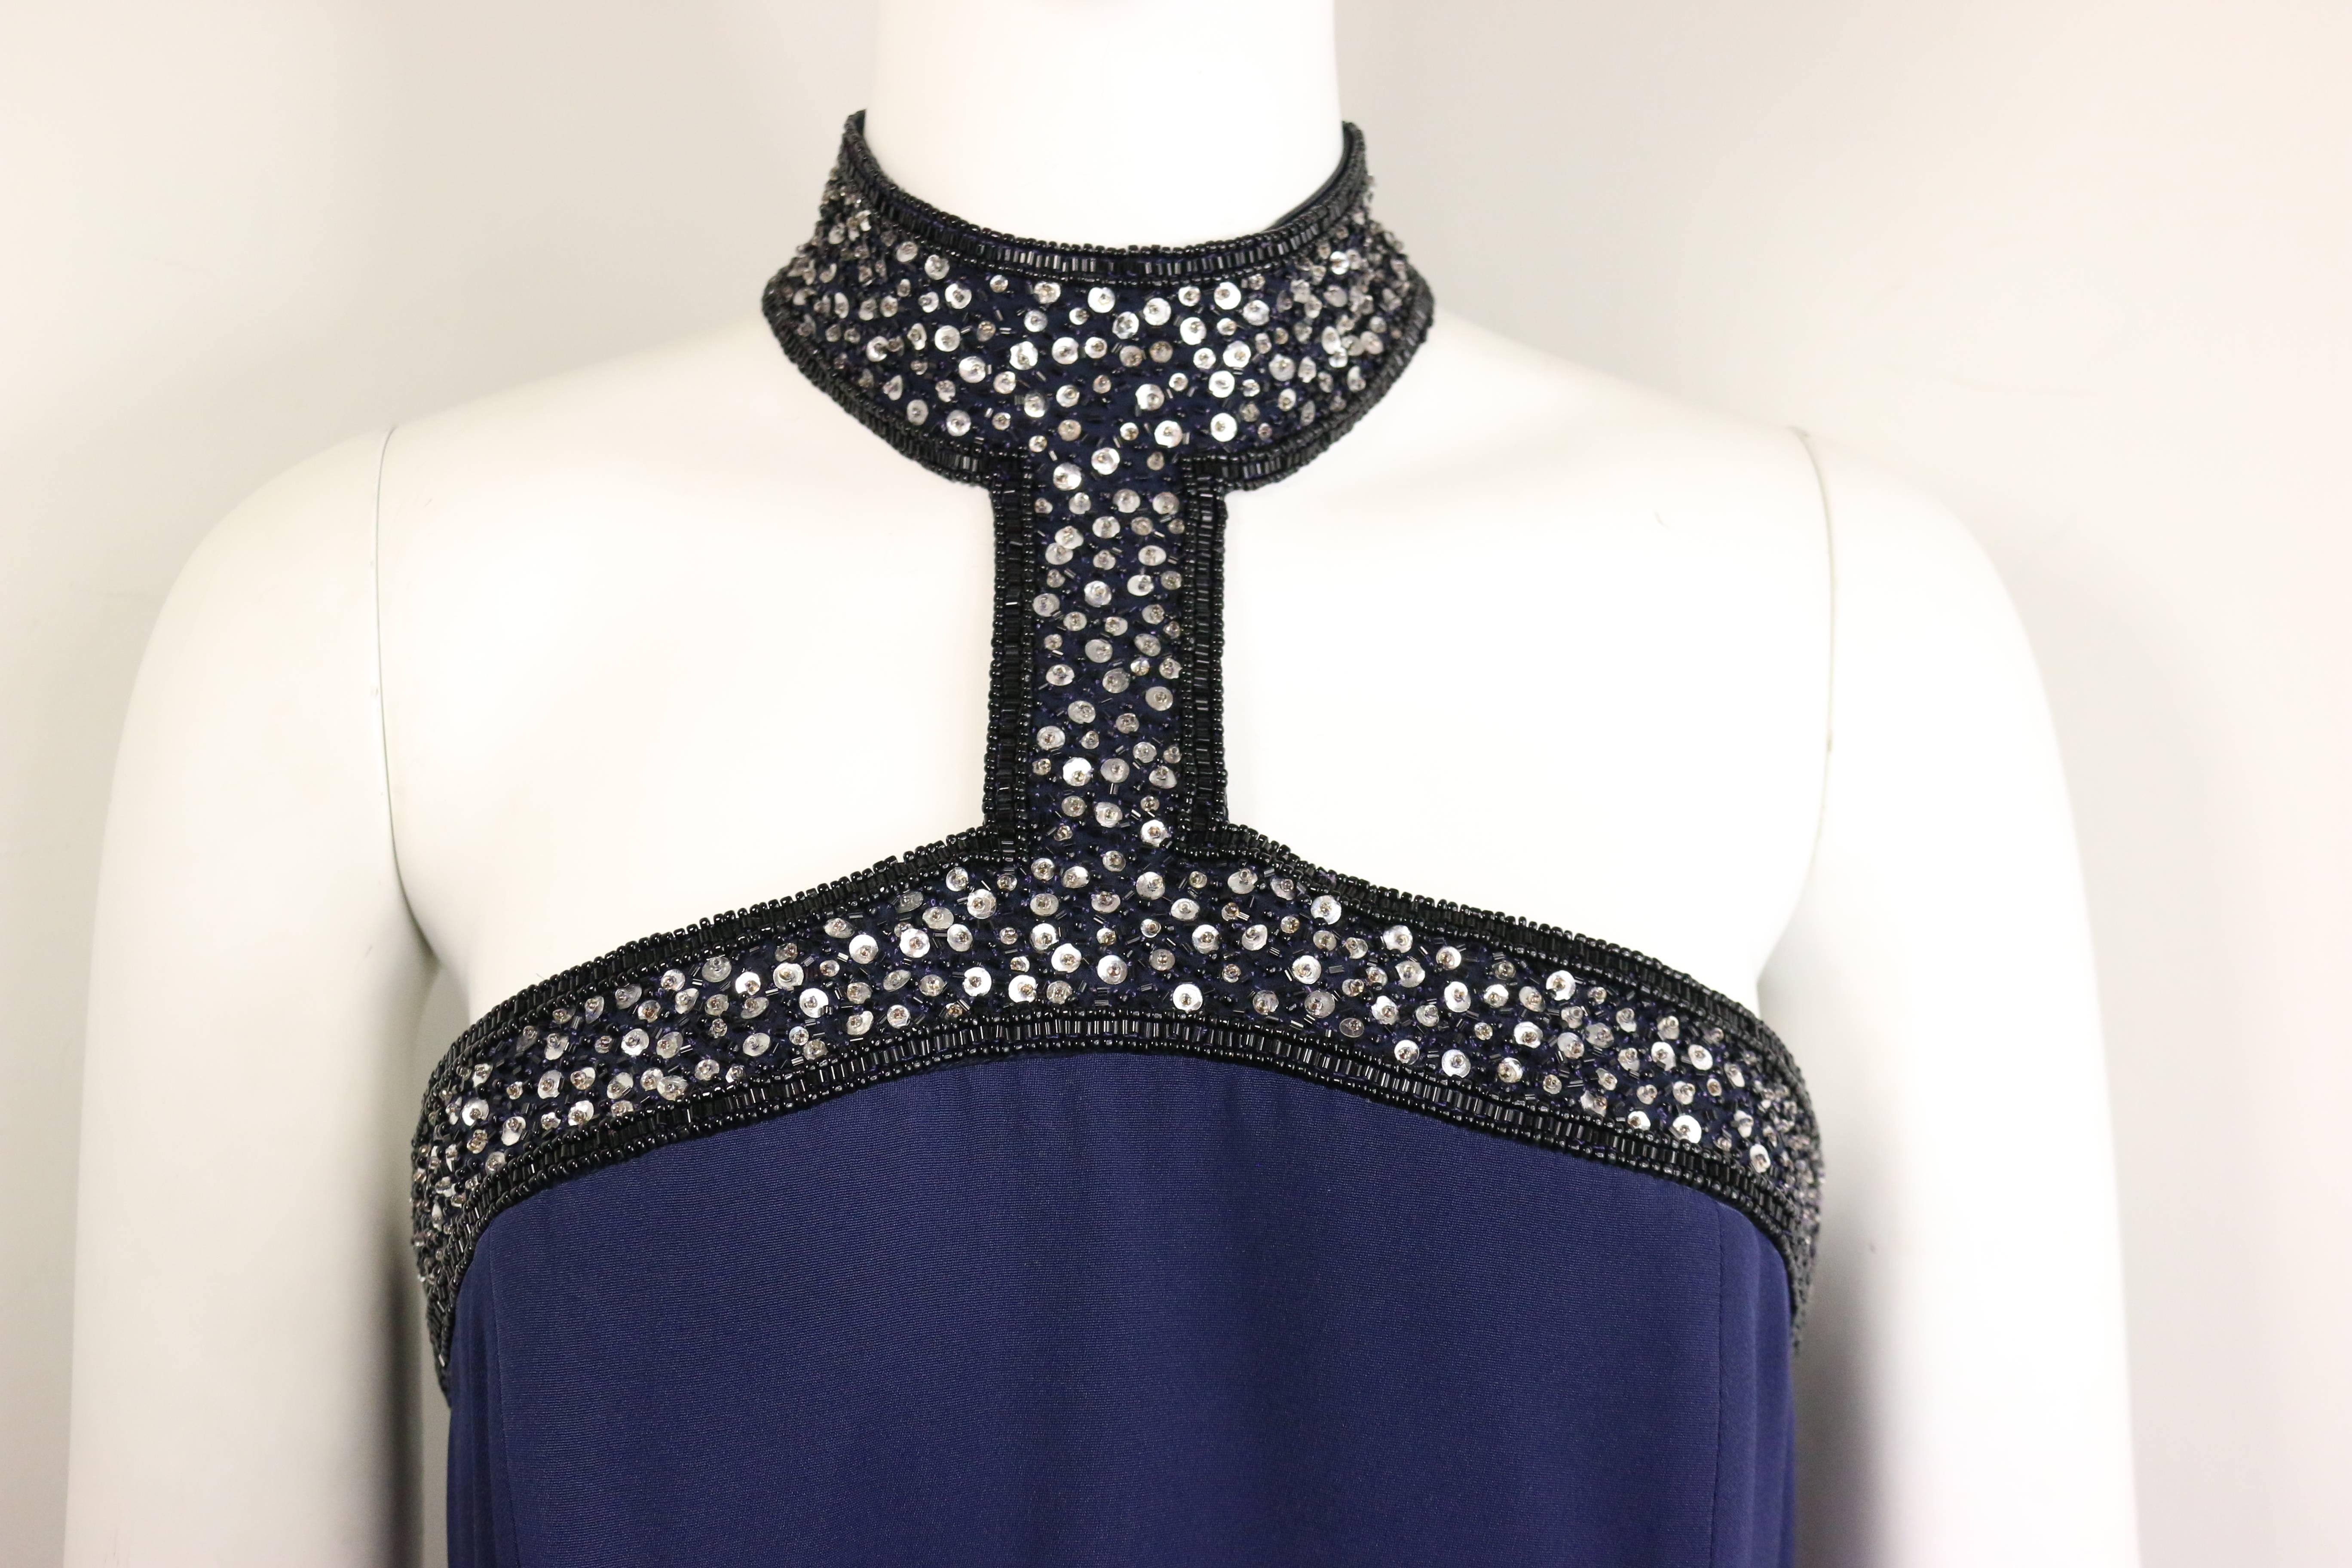 - Vintage 80s Escada Couture dark blue choker neck with silver sequins and black beads mermaid silk nightgown.  The gown is longer at the back than the front. Very elegant and chic in mermaid silhouette.  

- Made in Germany. 

- 100% Silk. 100%